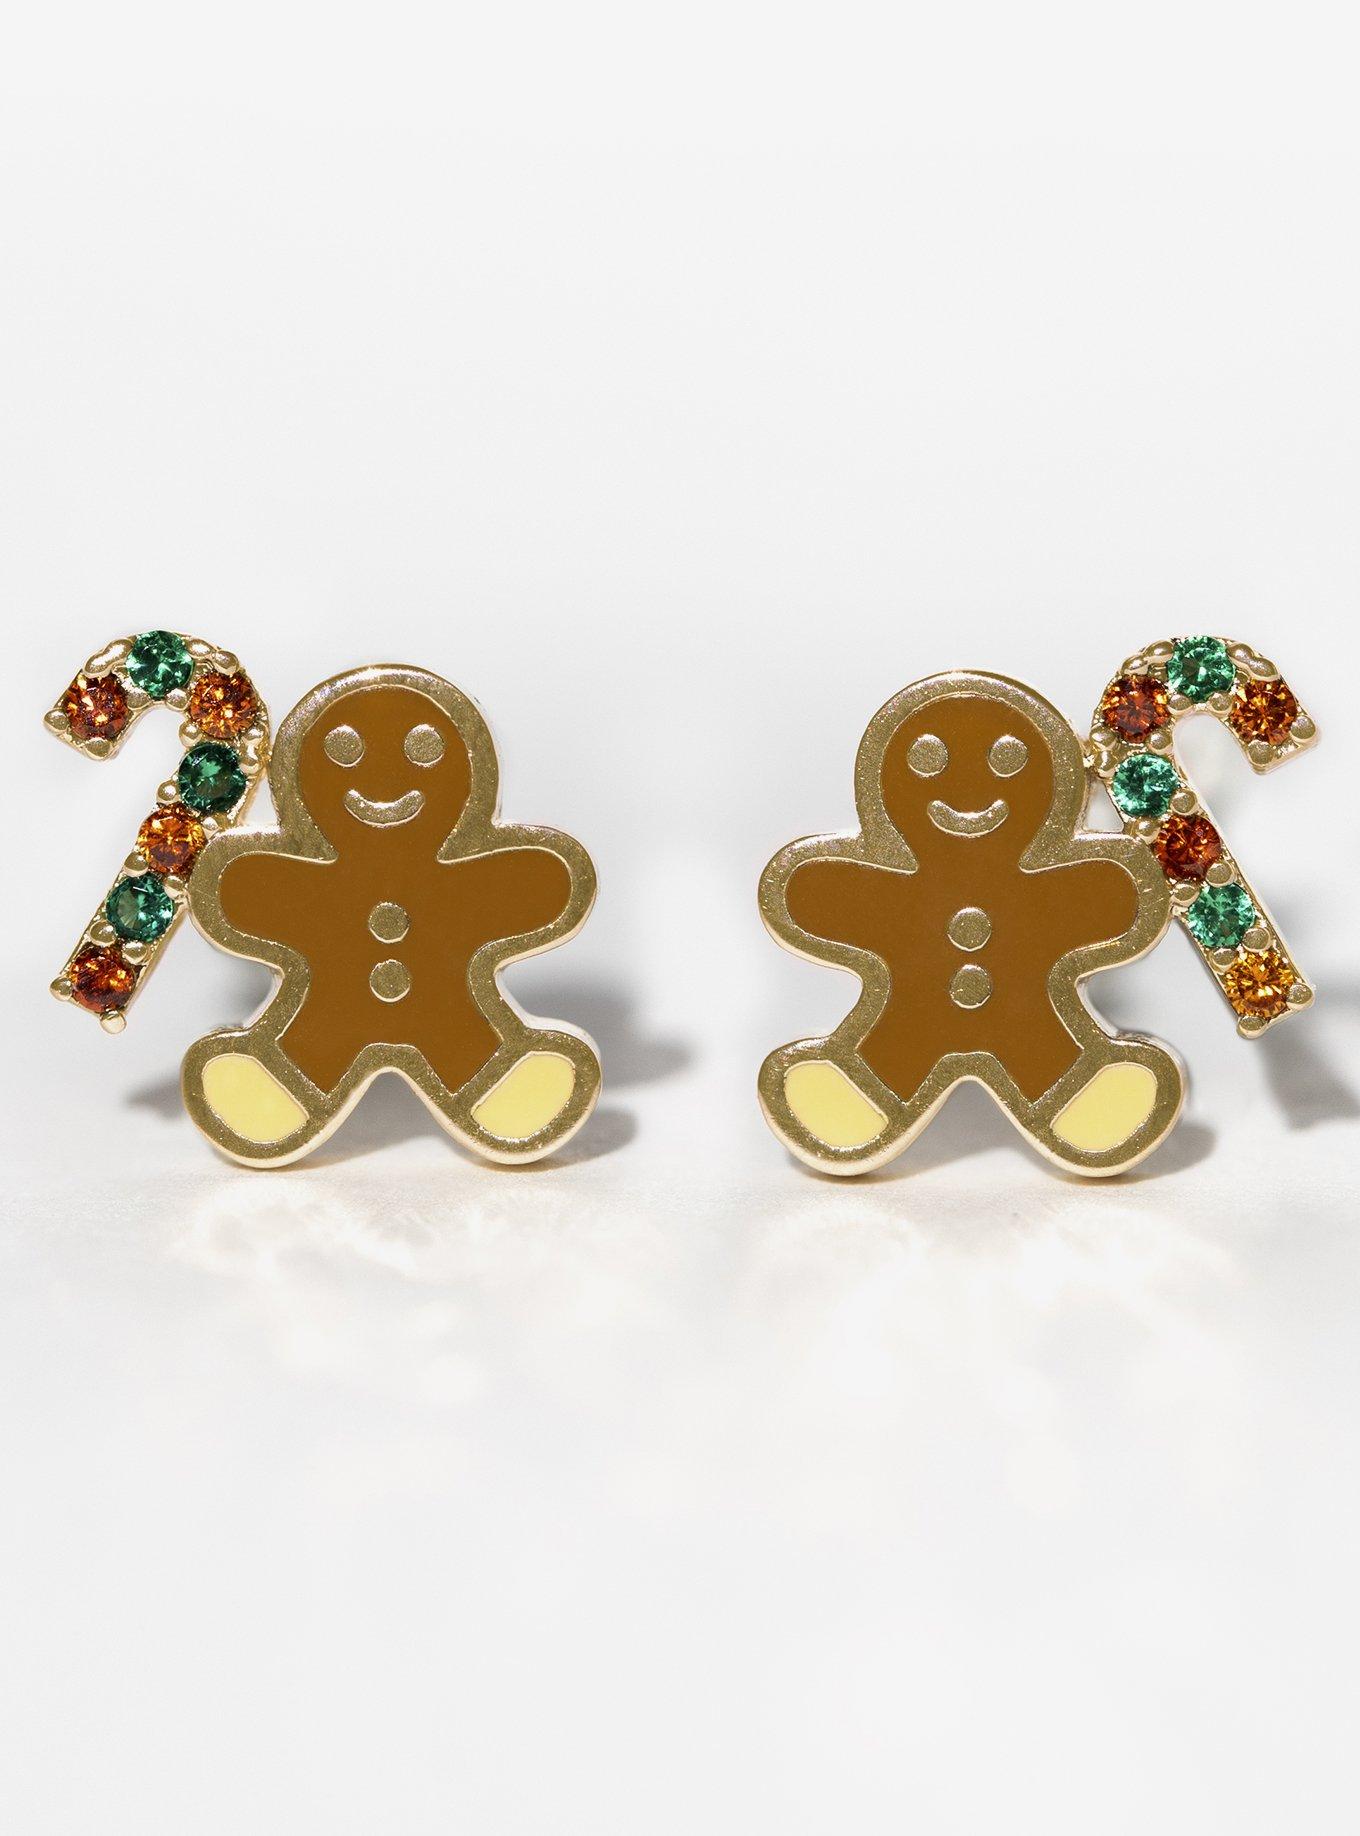 Girls Crew Gingerbread Man Candy Cane Stud Earrings, , hi-res